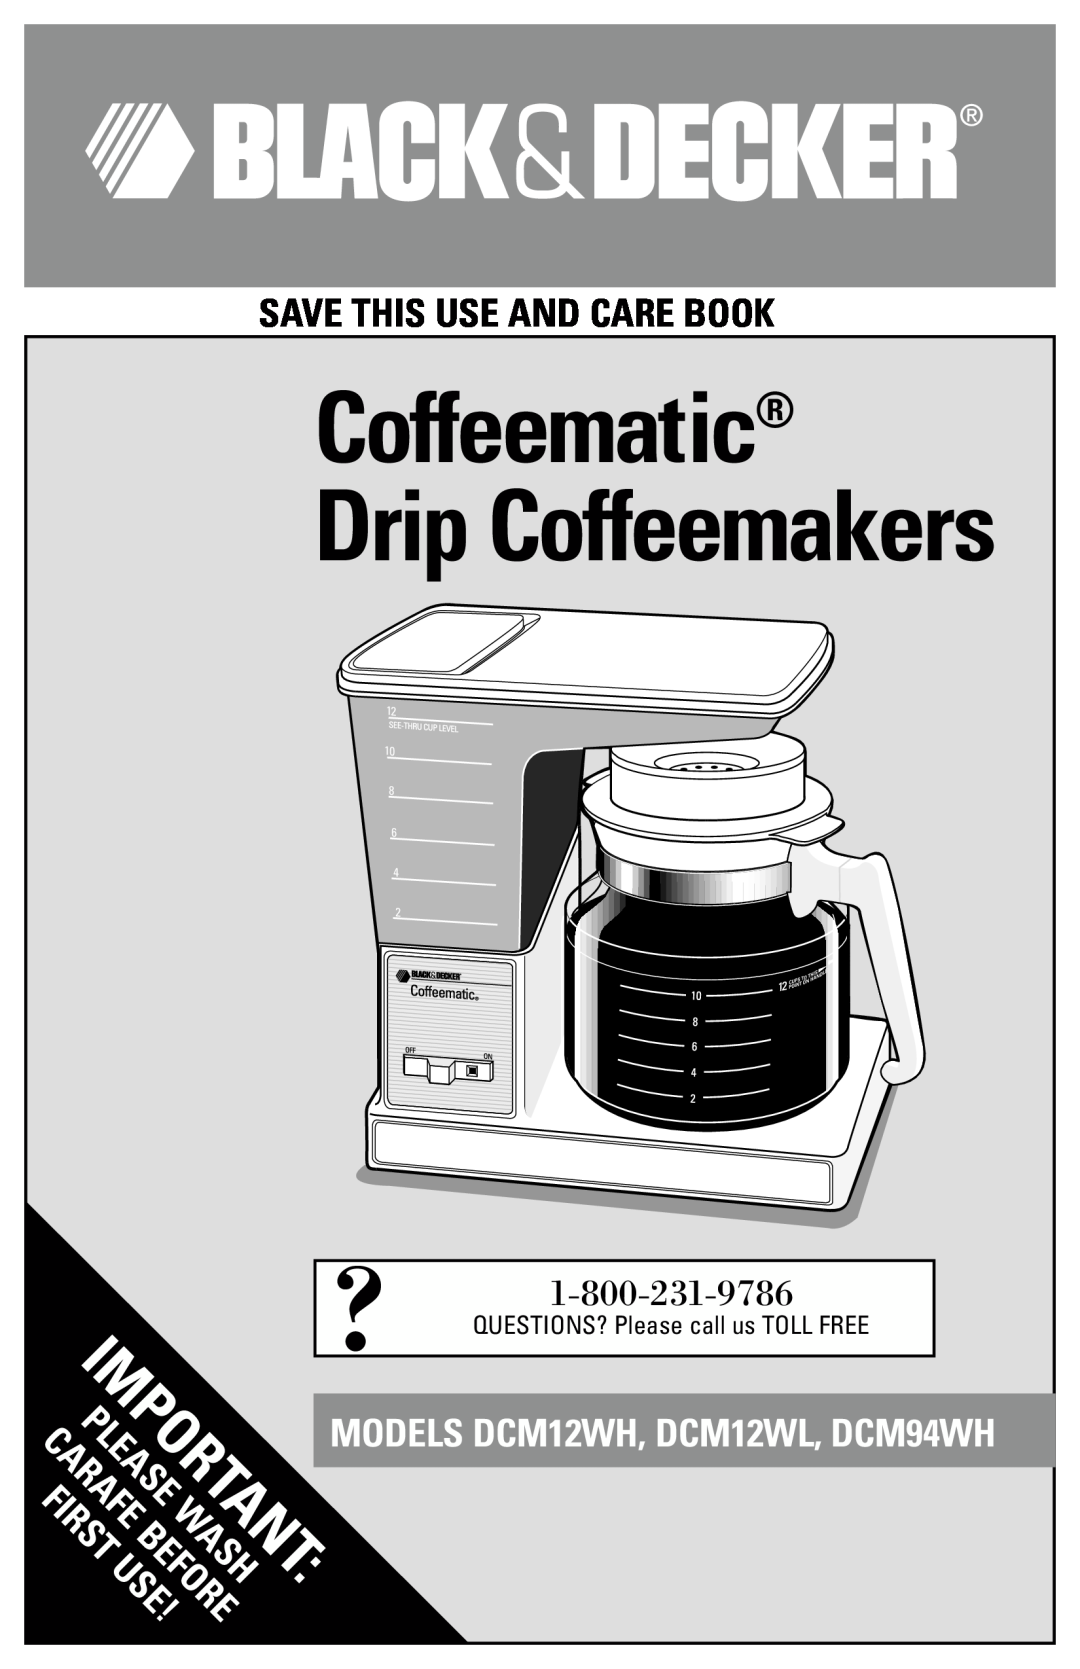 Black & Decker manual MODELS DCM12WH, DCM12WL, DCM94WH, Coffeematic, Drip Coffeemakers, Please, Wash, First, Use!Before 